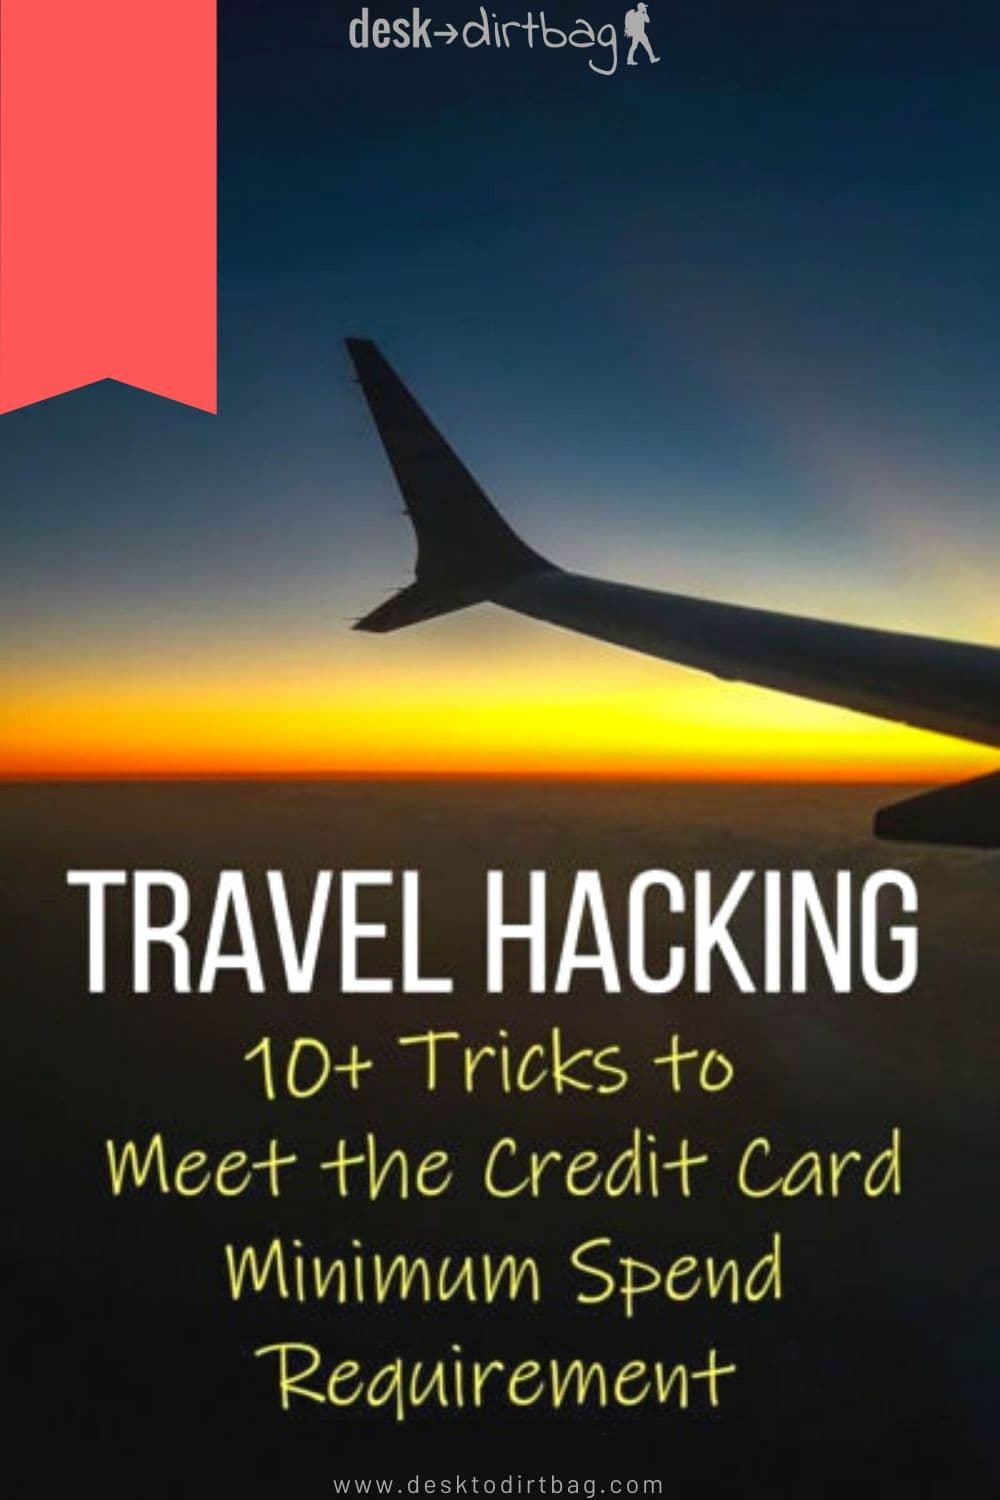 The 10 Best Credit Card Minimum Spend Tricks for Travel Hacking